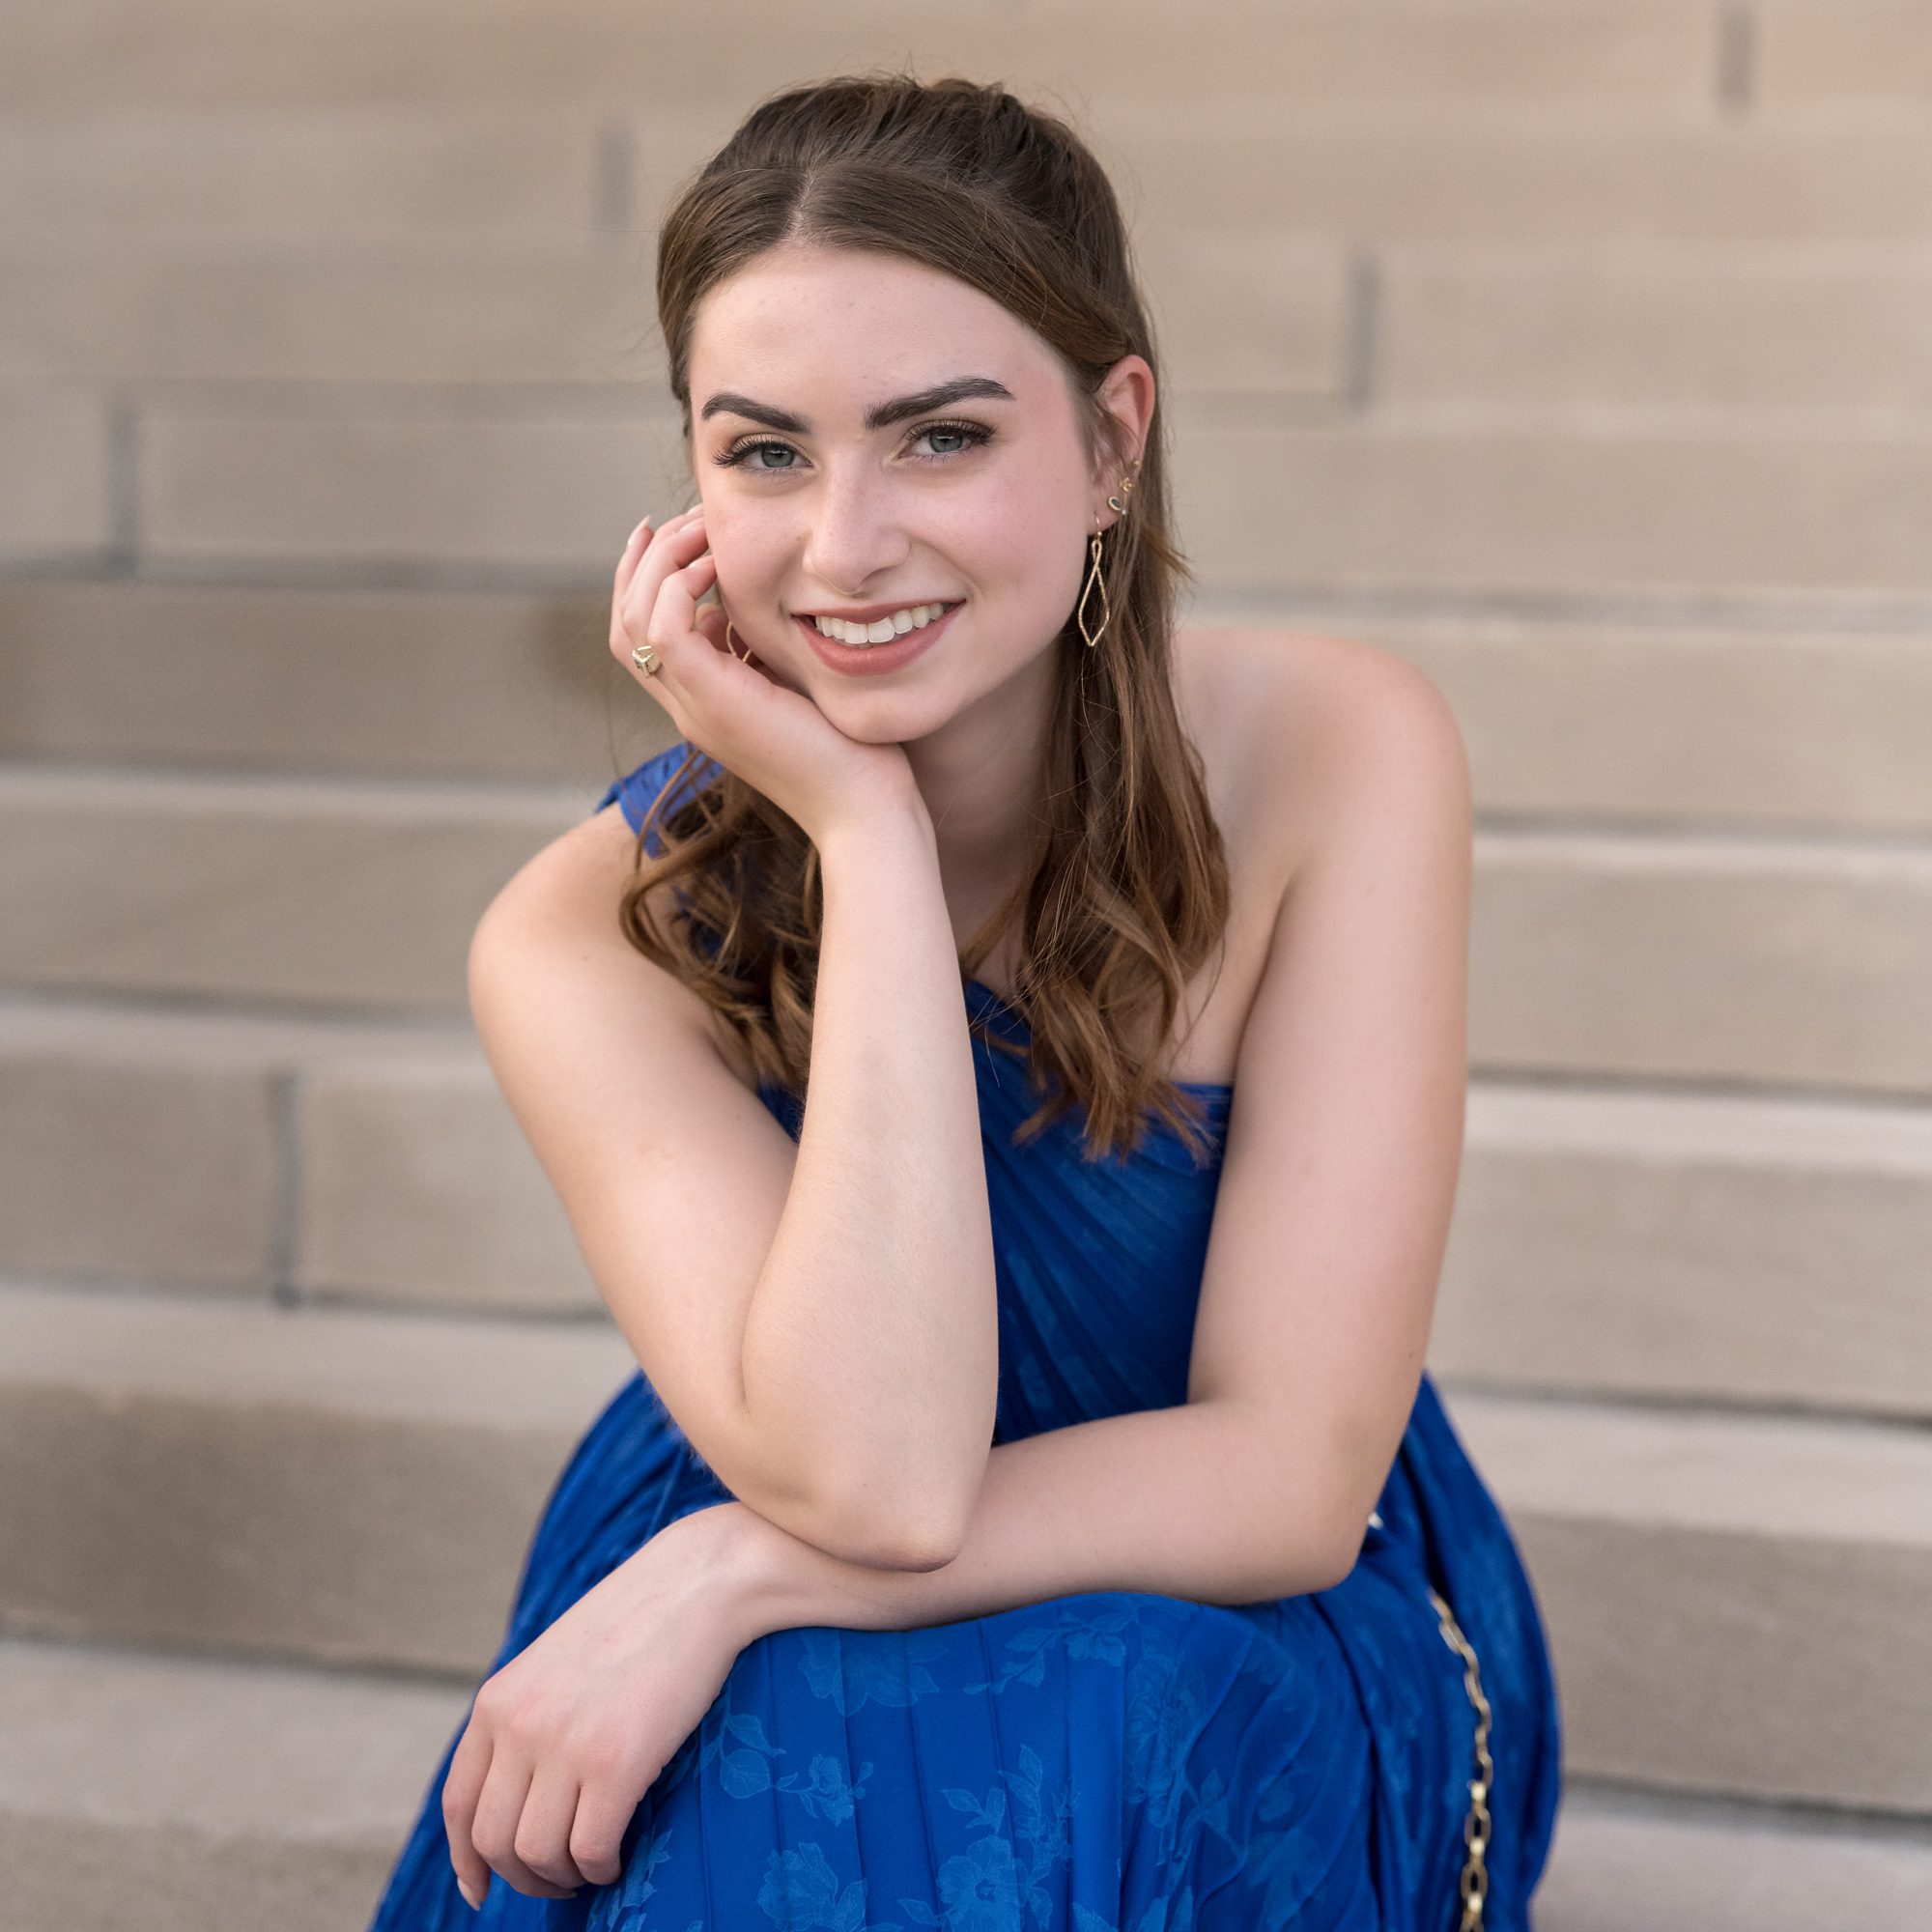 High School Senior Portrait photographed by Faces You Love, at the Nelson Atkins Art museum in Kansas City. Senior girl is wearing a royal blue dress, while sitting on the steps.